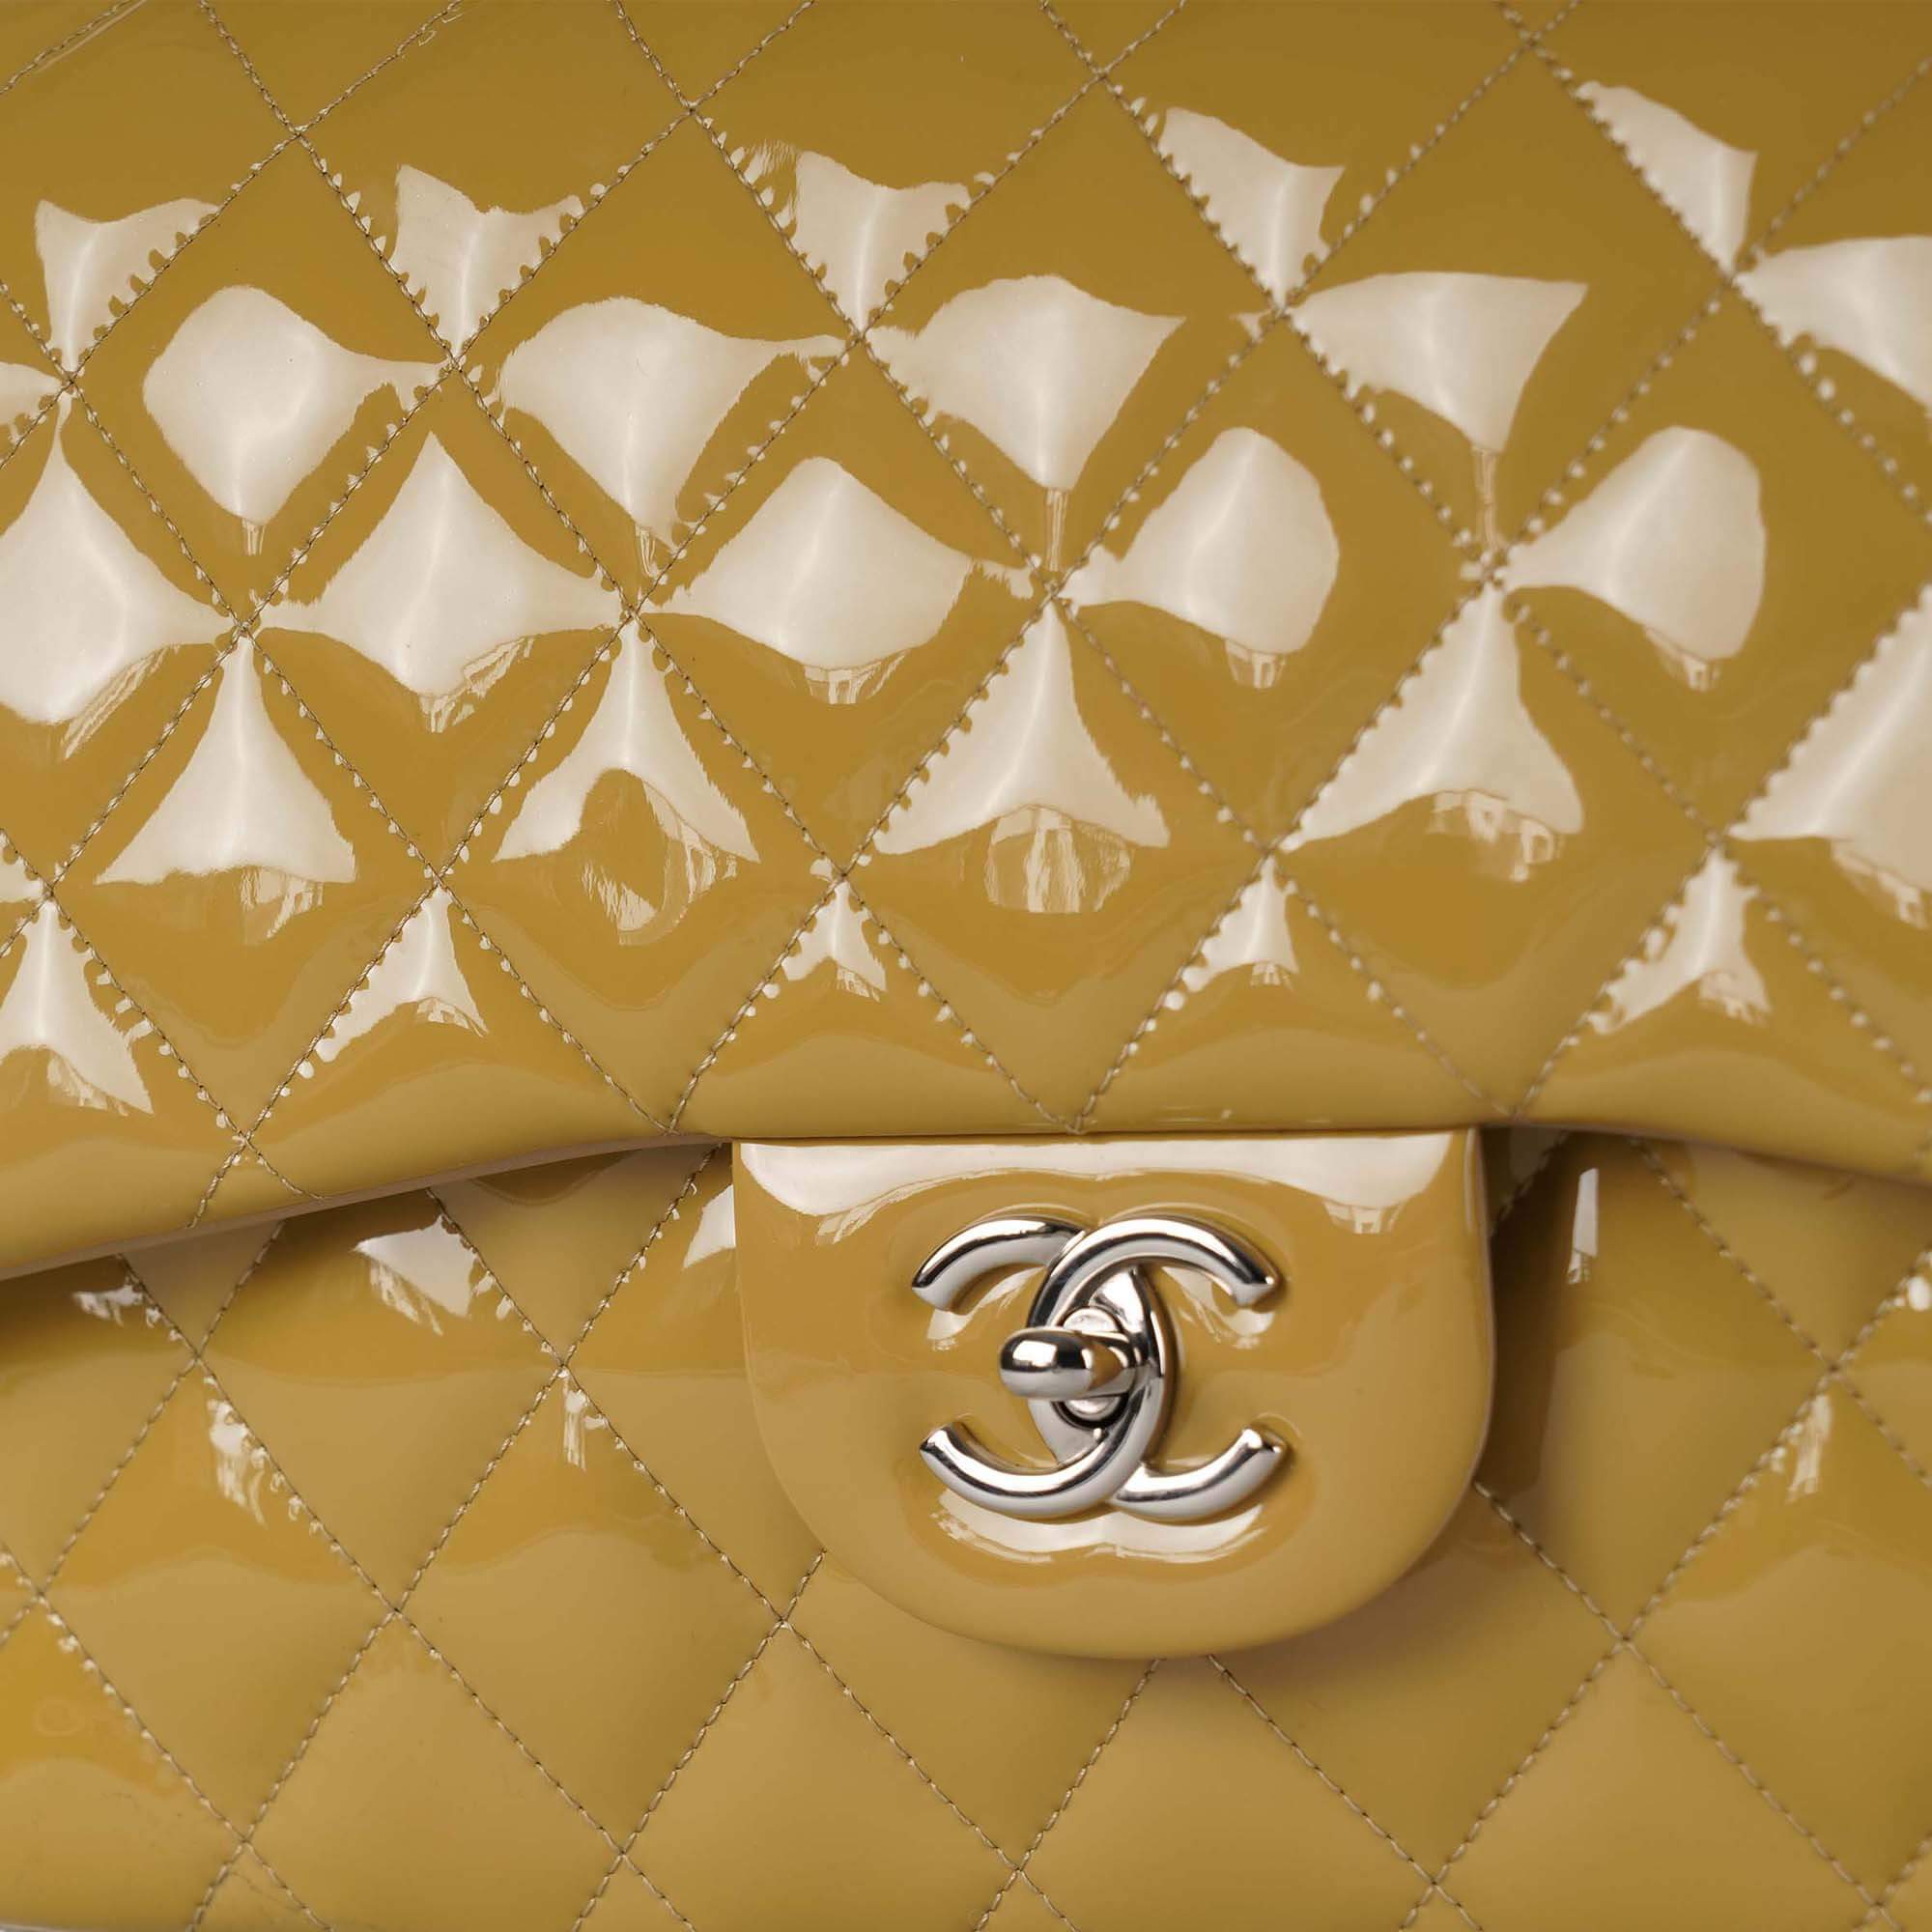 Chanel - Beige Quilted Patent Leather Double Flap Jumbo Bag